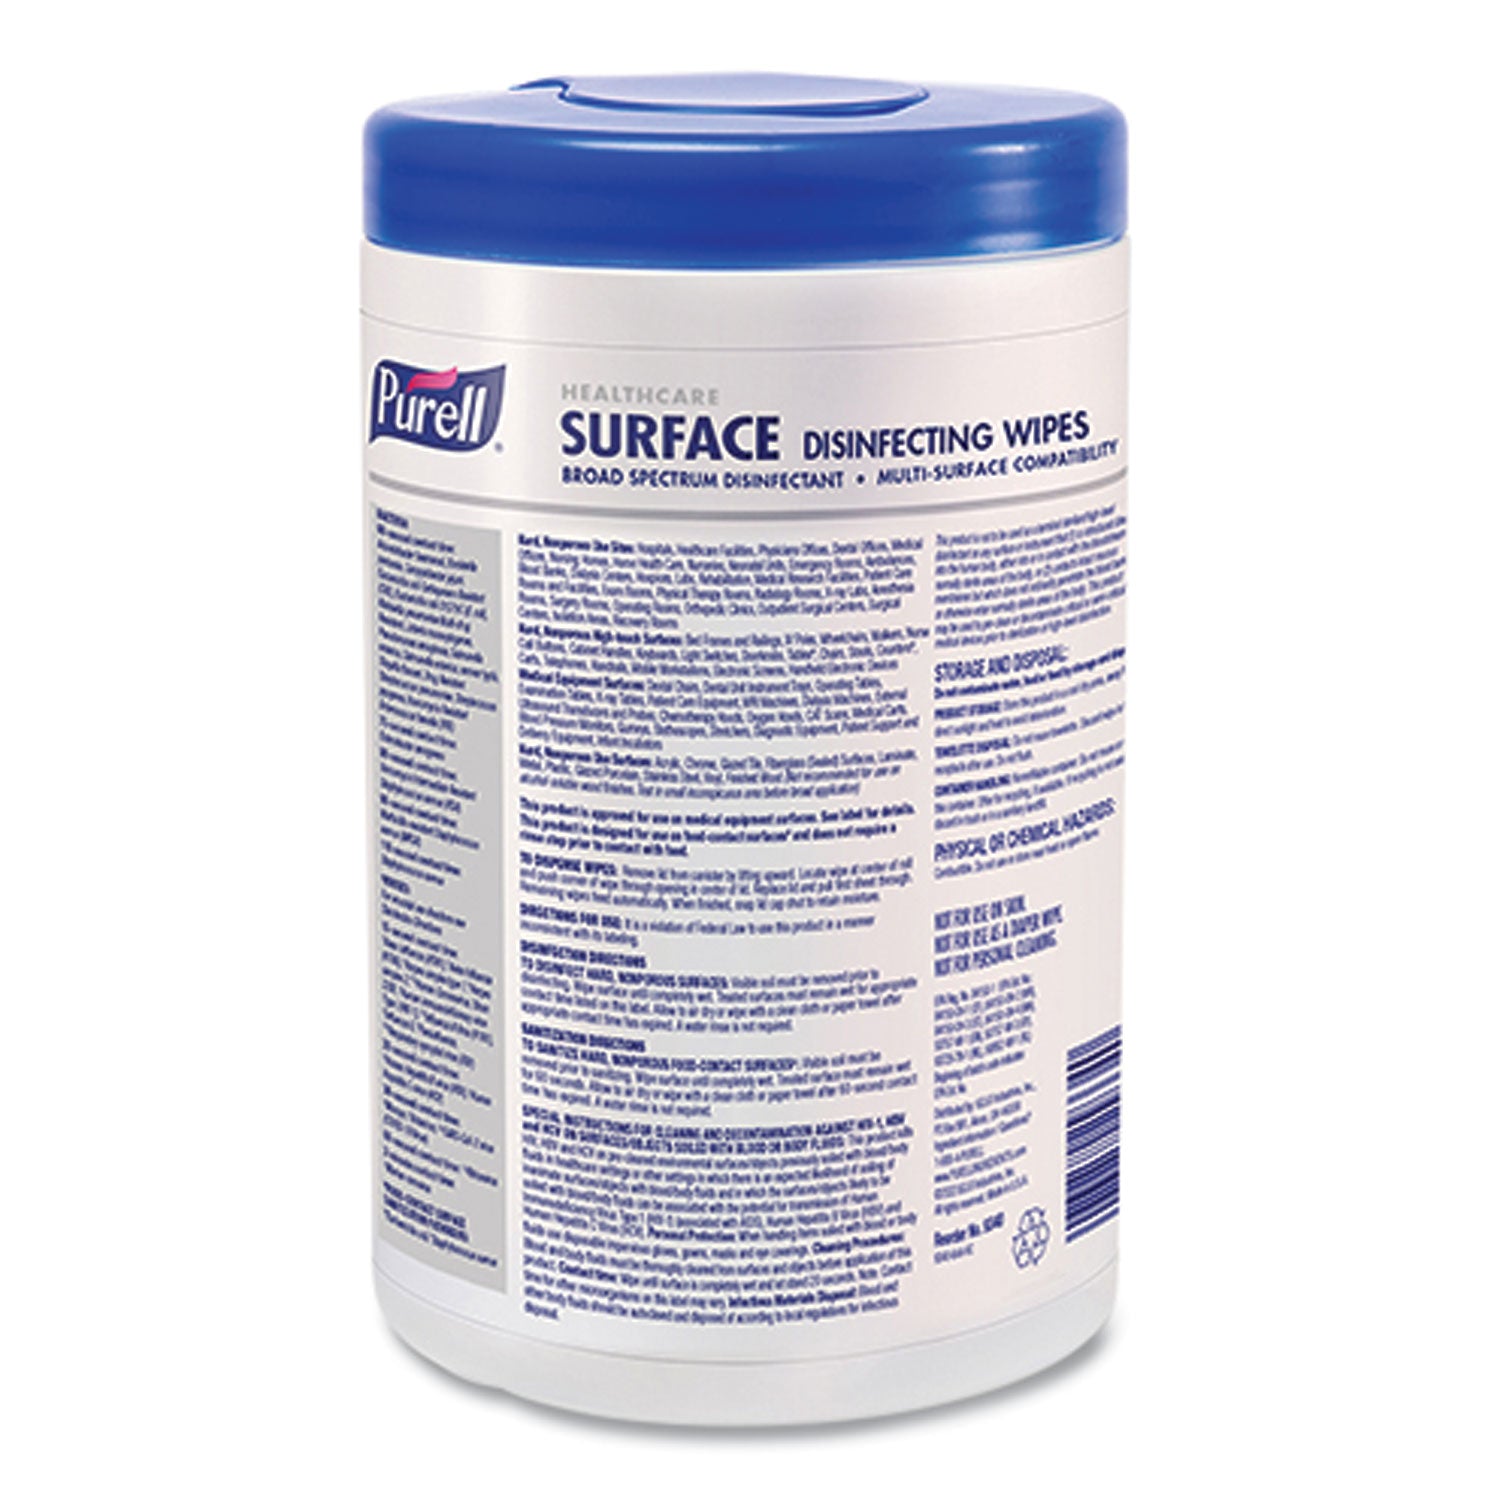 healthcare-surface-disinfecting-wipes-1-ply-7-x-10-unscented-white-110-wipes-canister-6-canisters-carton_goj934006 - 3